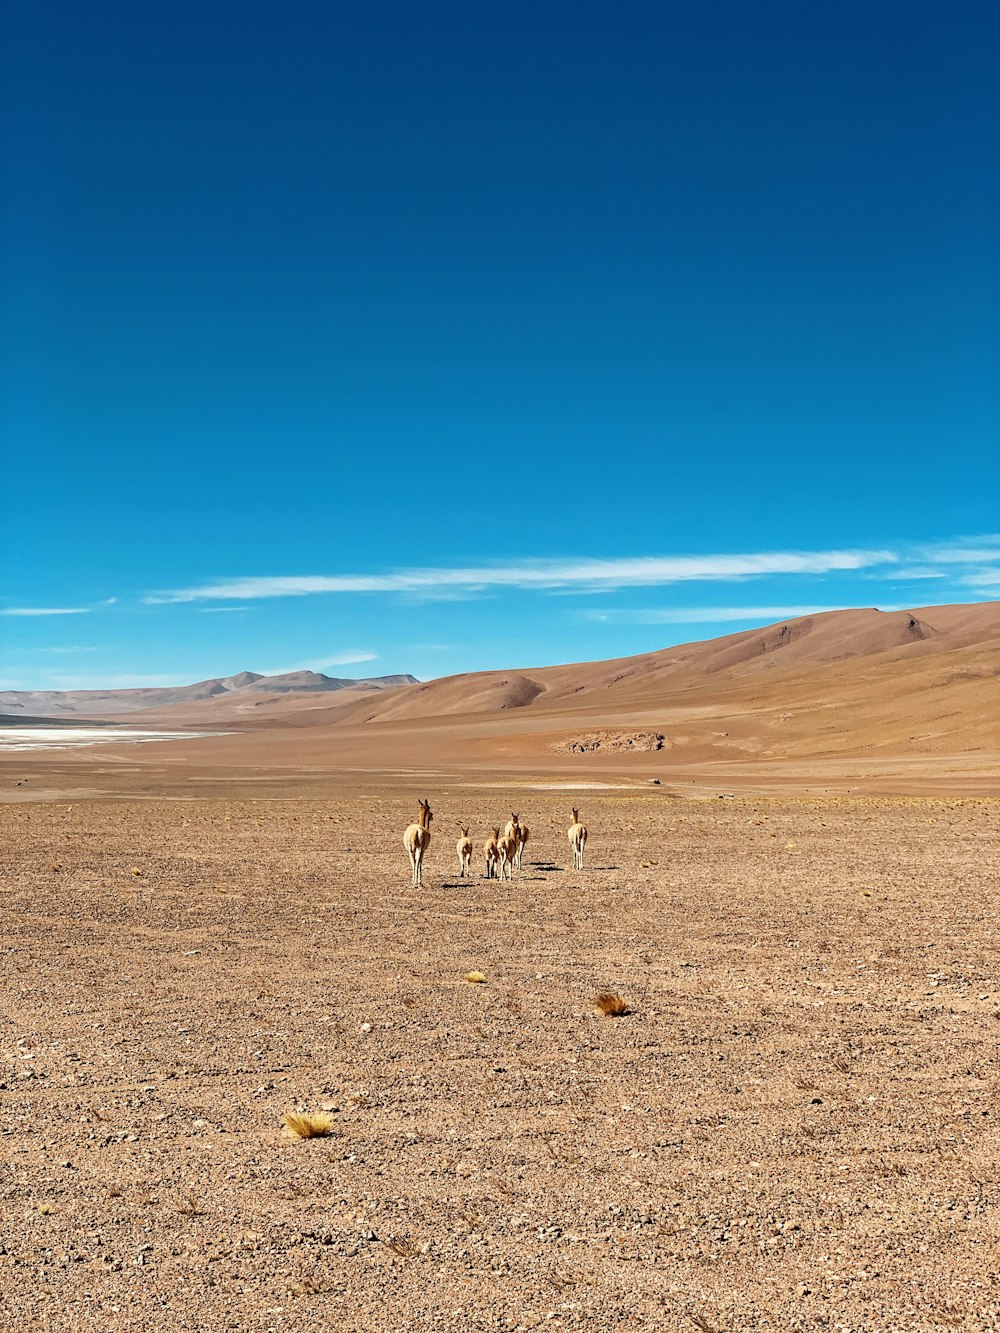 a group of animals walking across a dry grass field